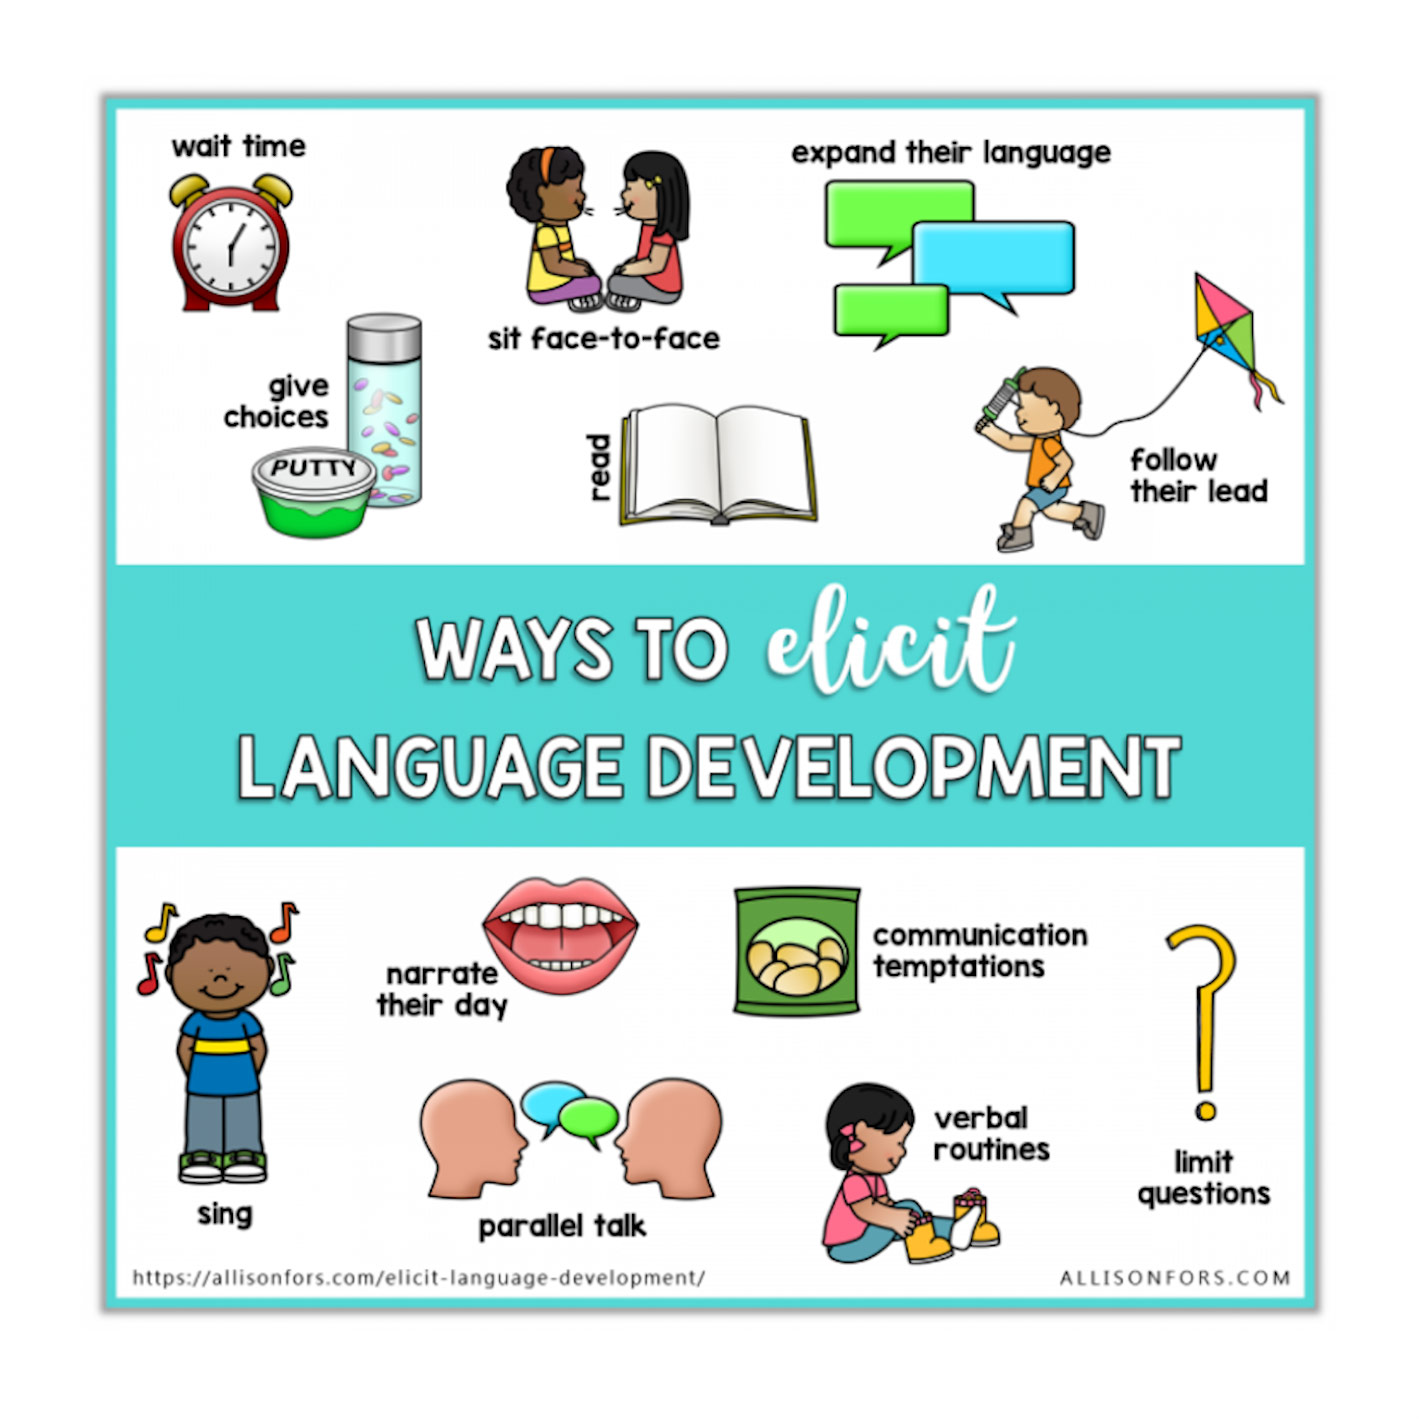 An educational infographic about ways to elicit language development